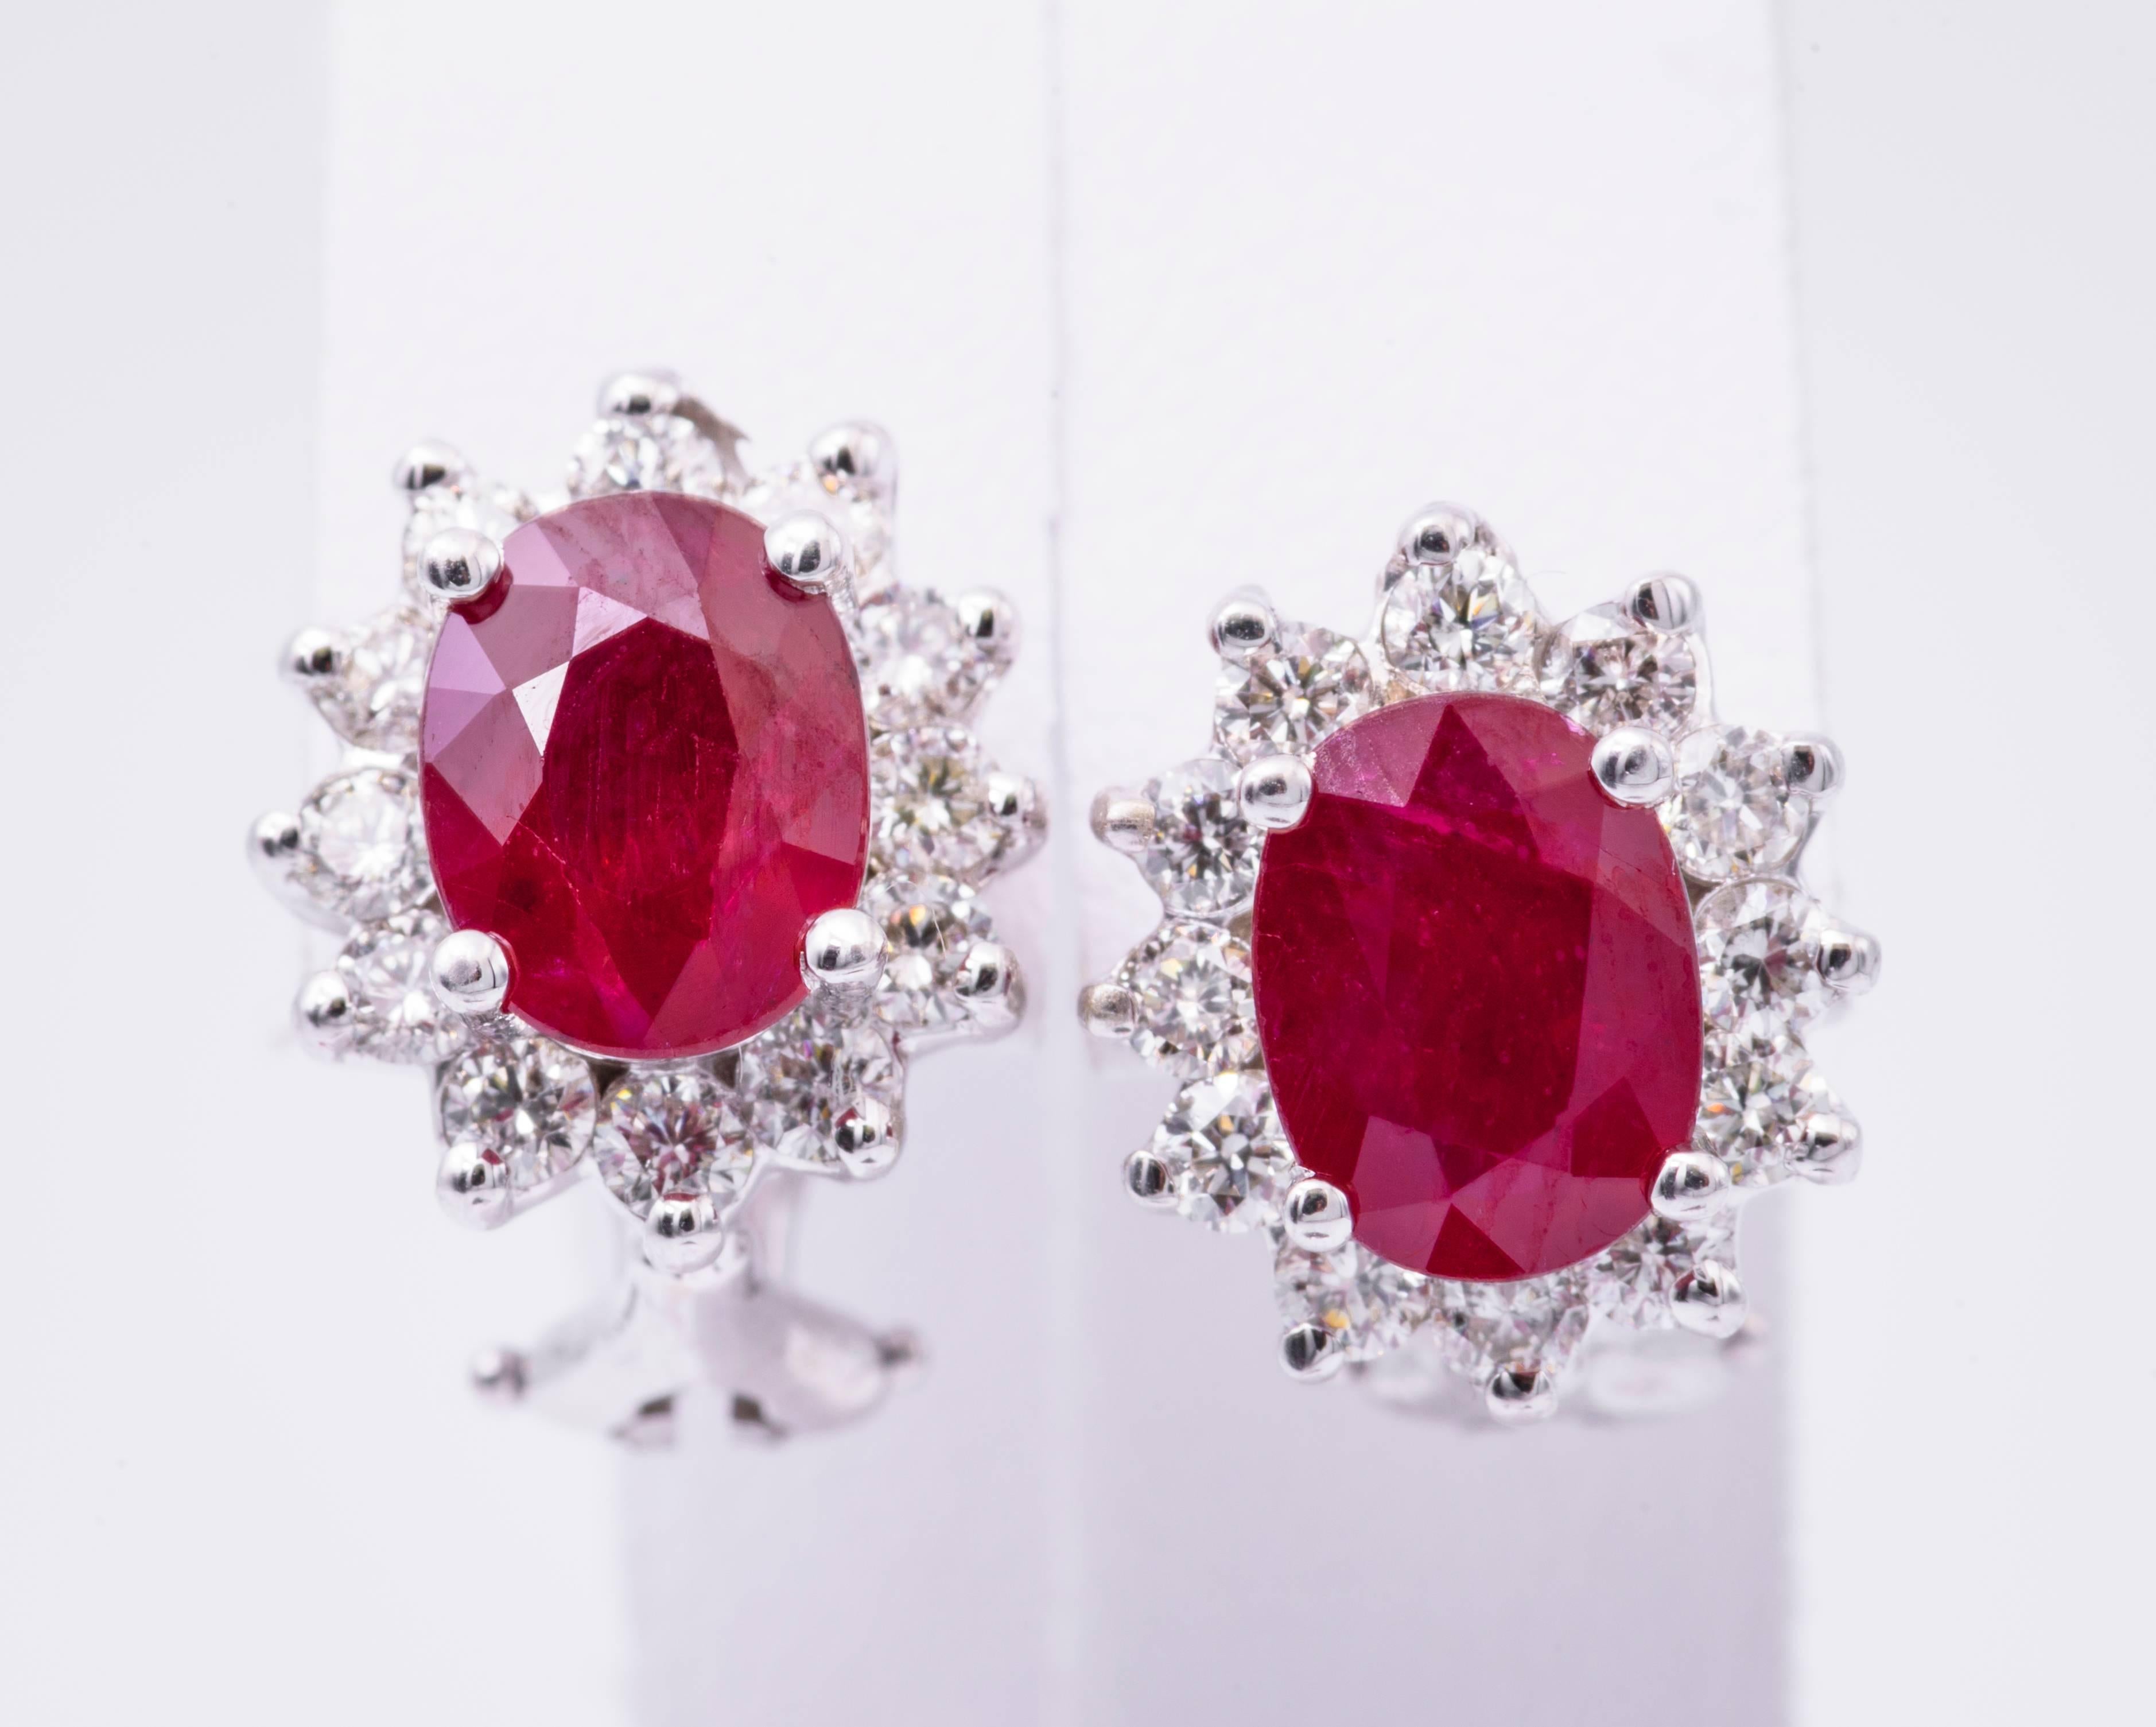 The oval ruby in these earrings have a total carat weight of 3.20 carats, and they measure 8x6 MM.. The diamonds have a total carat weight of 0.94 carats.
The diamonds are H color and clarity is SI2.
The ruby is  very bright and nice.
12.5 X 10.9